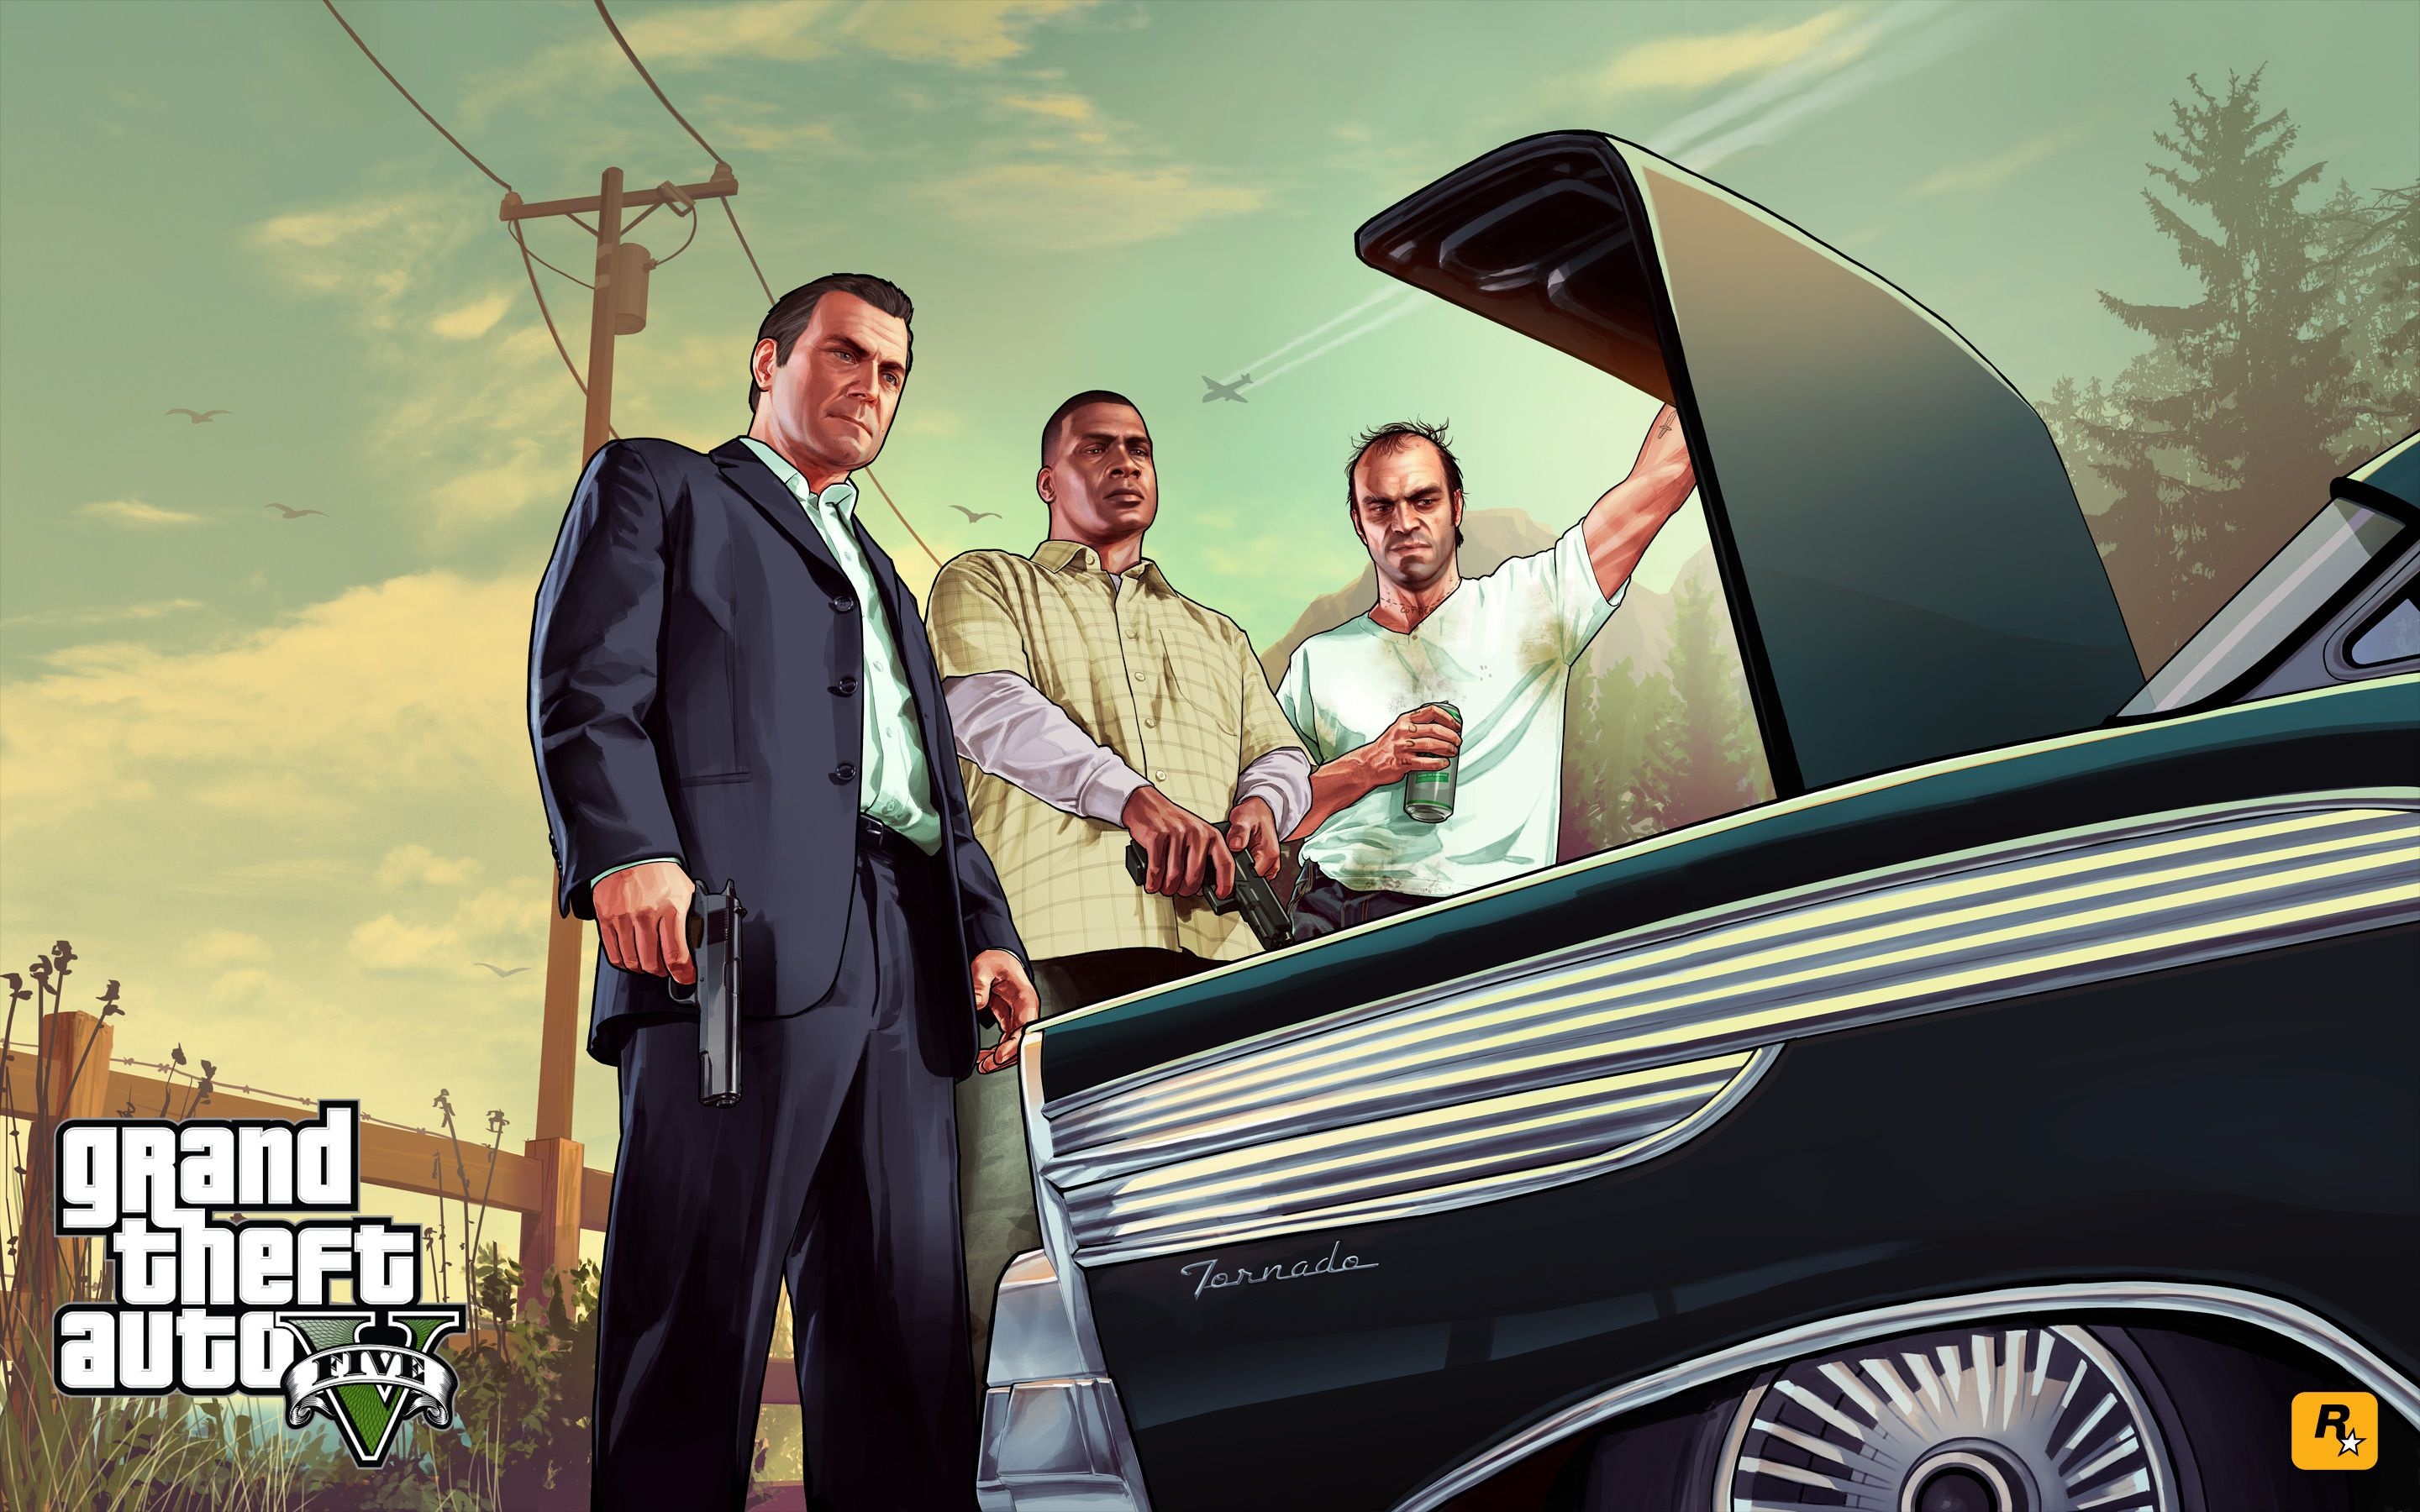 Grand Theft Auto, Pin page, High-speed chases, Criminal underworld, 2880x1800 HD Desktop